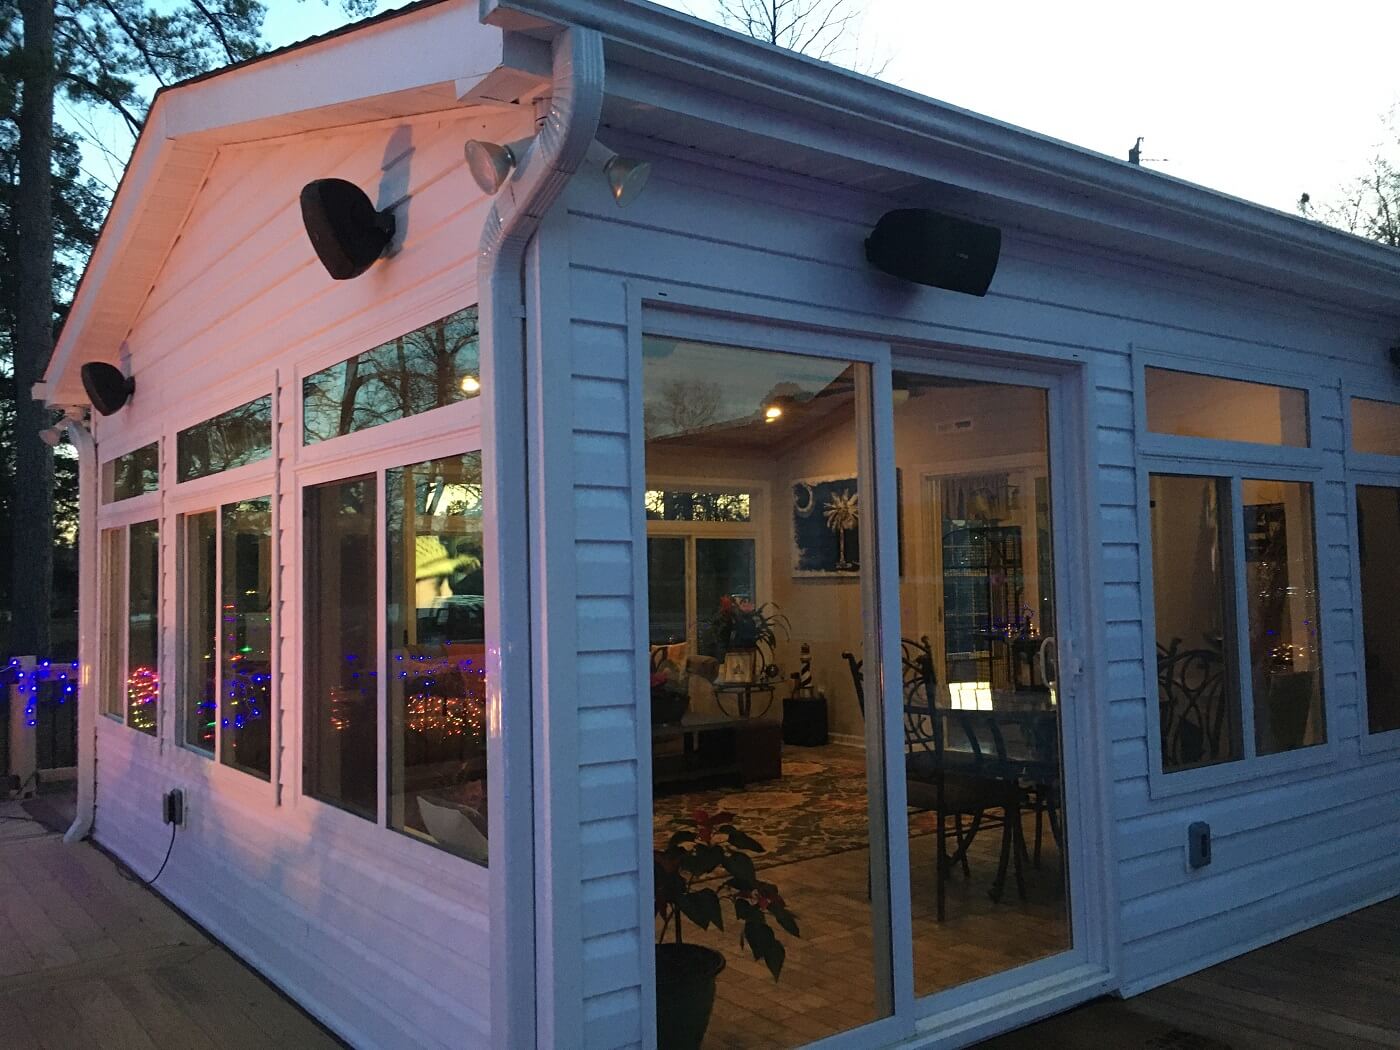 Exterior view of sunroom